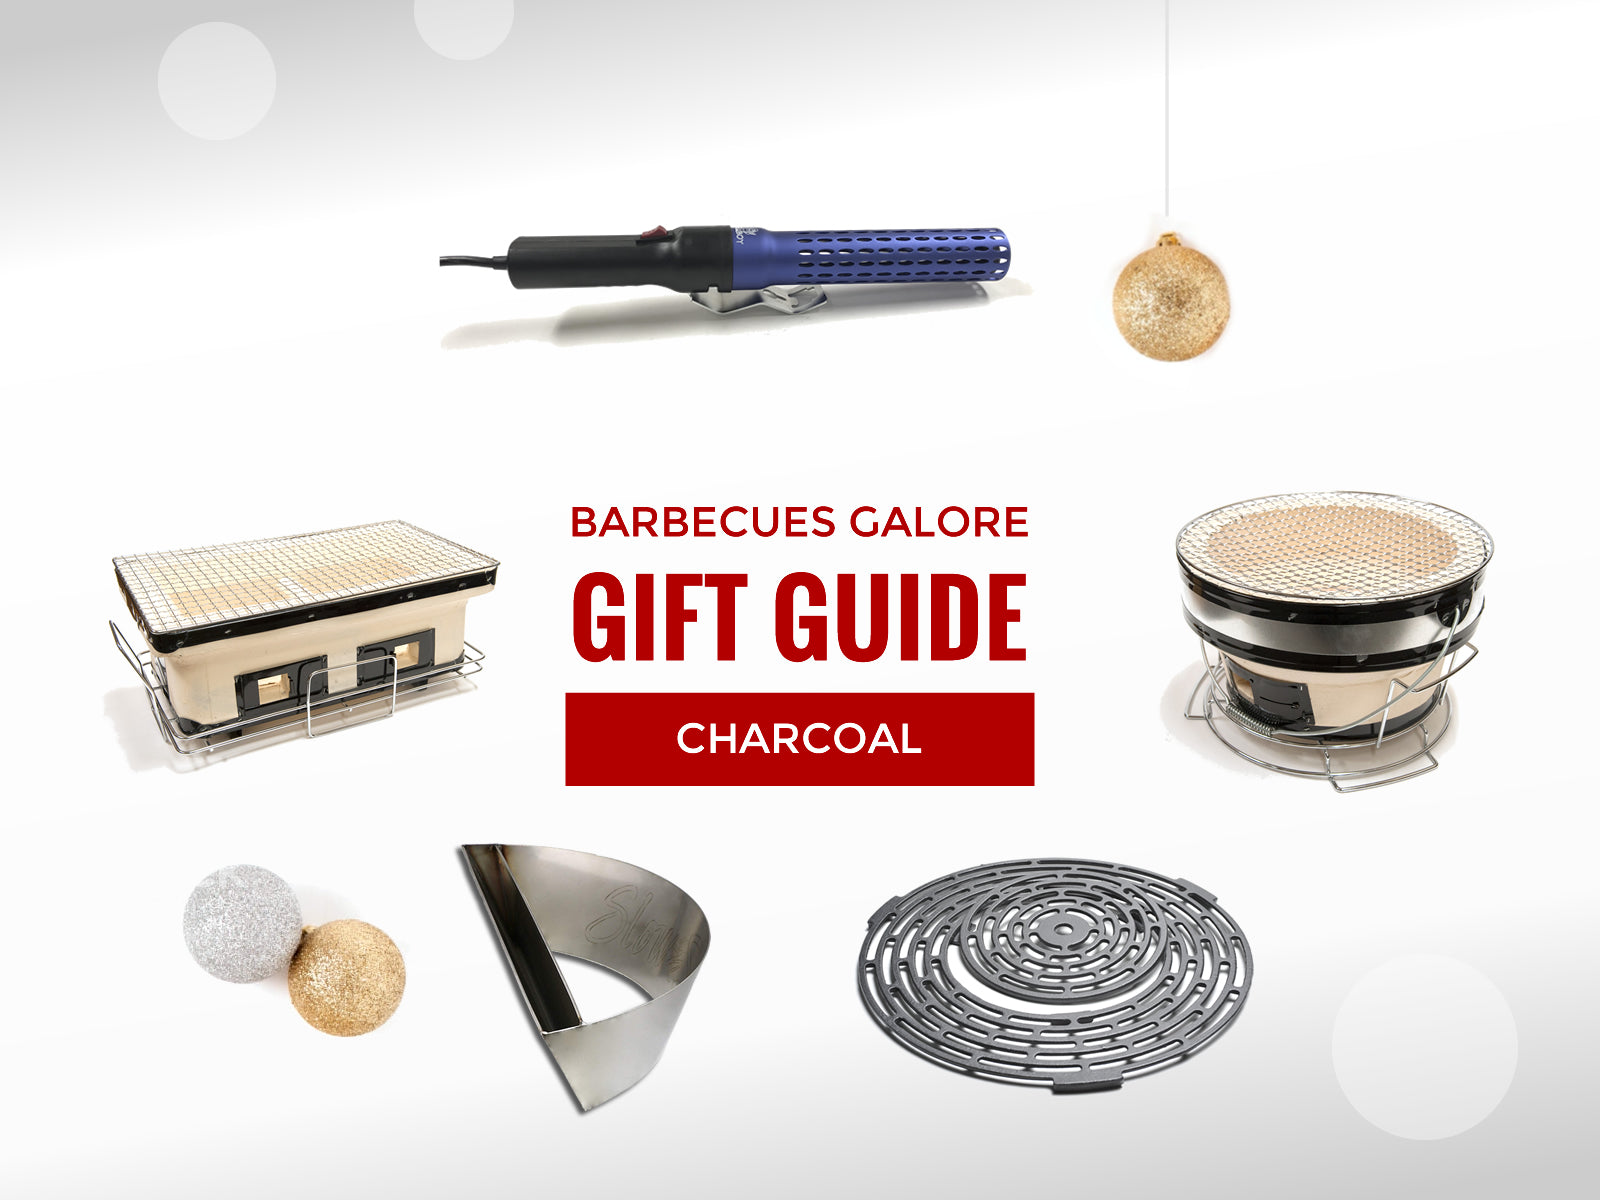 Gift Guide | Gift for Charcoal Grillers - Barbecues Galore